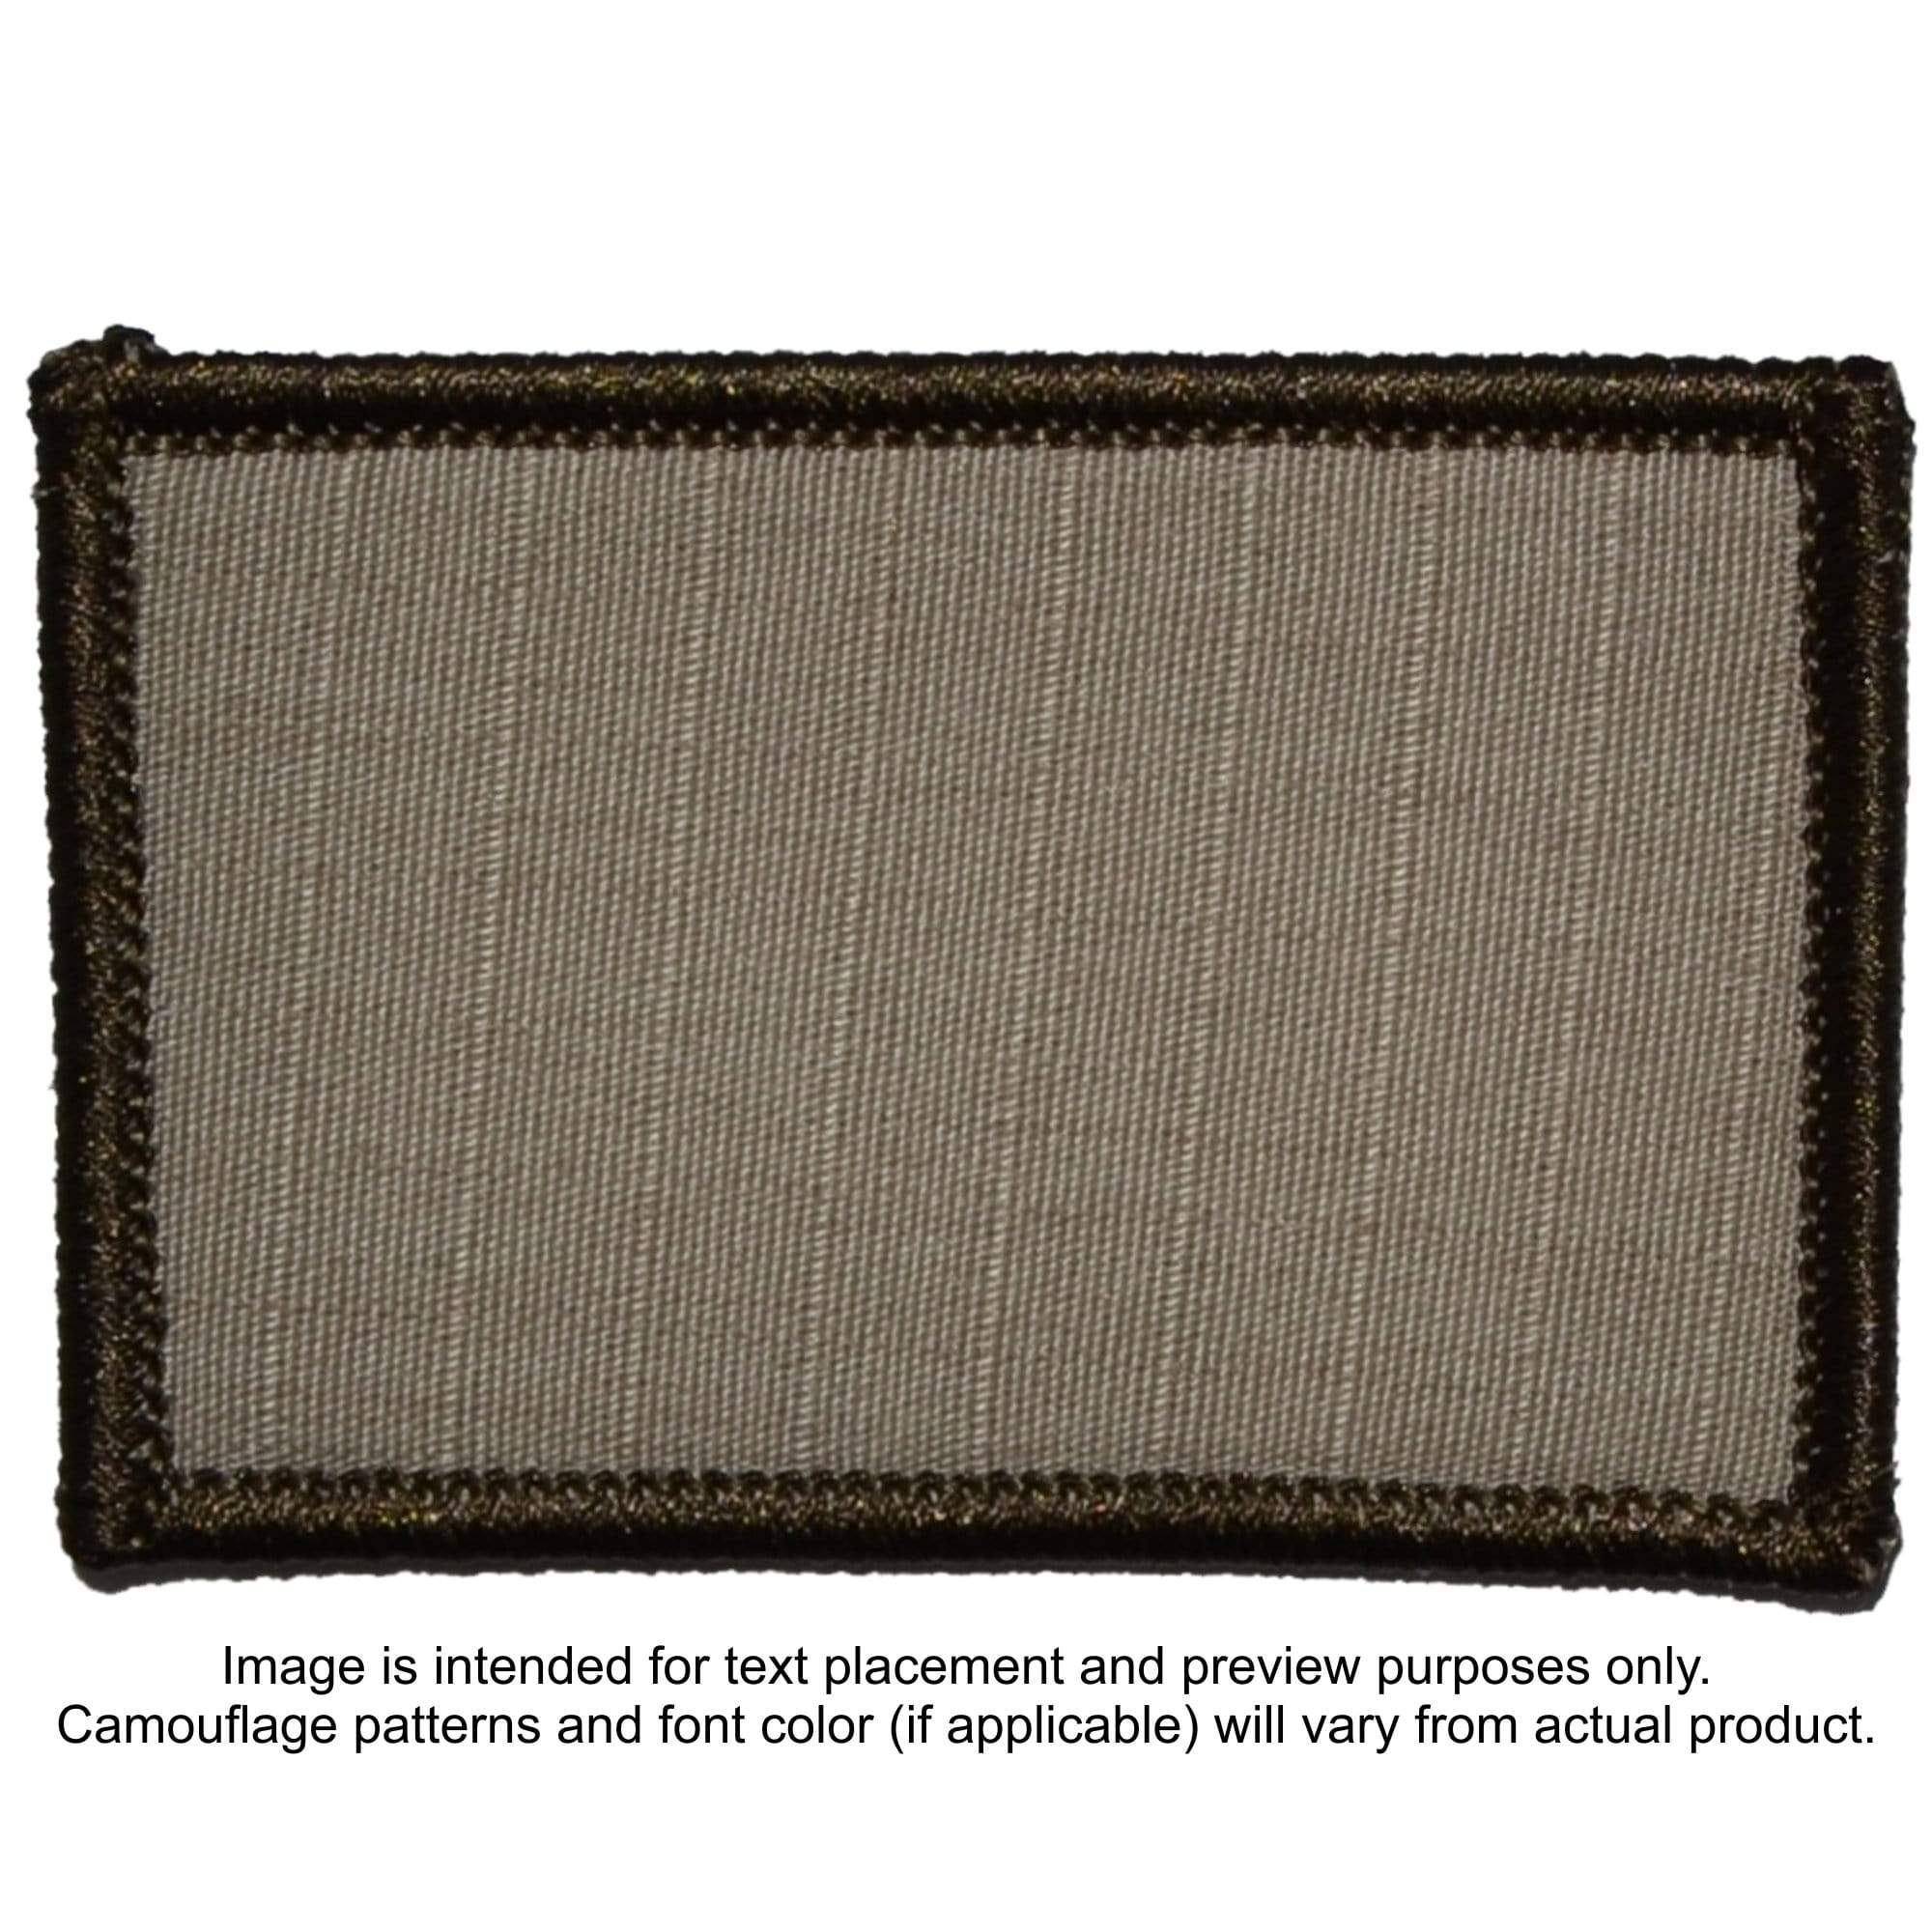  IR Goon Blackout 2x35 Morale Tactical Fastener Patch